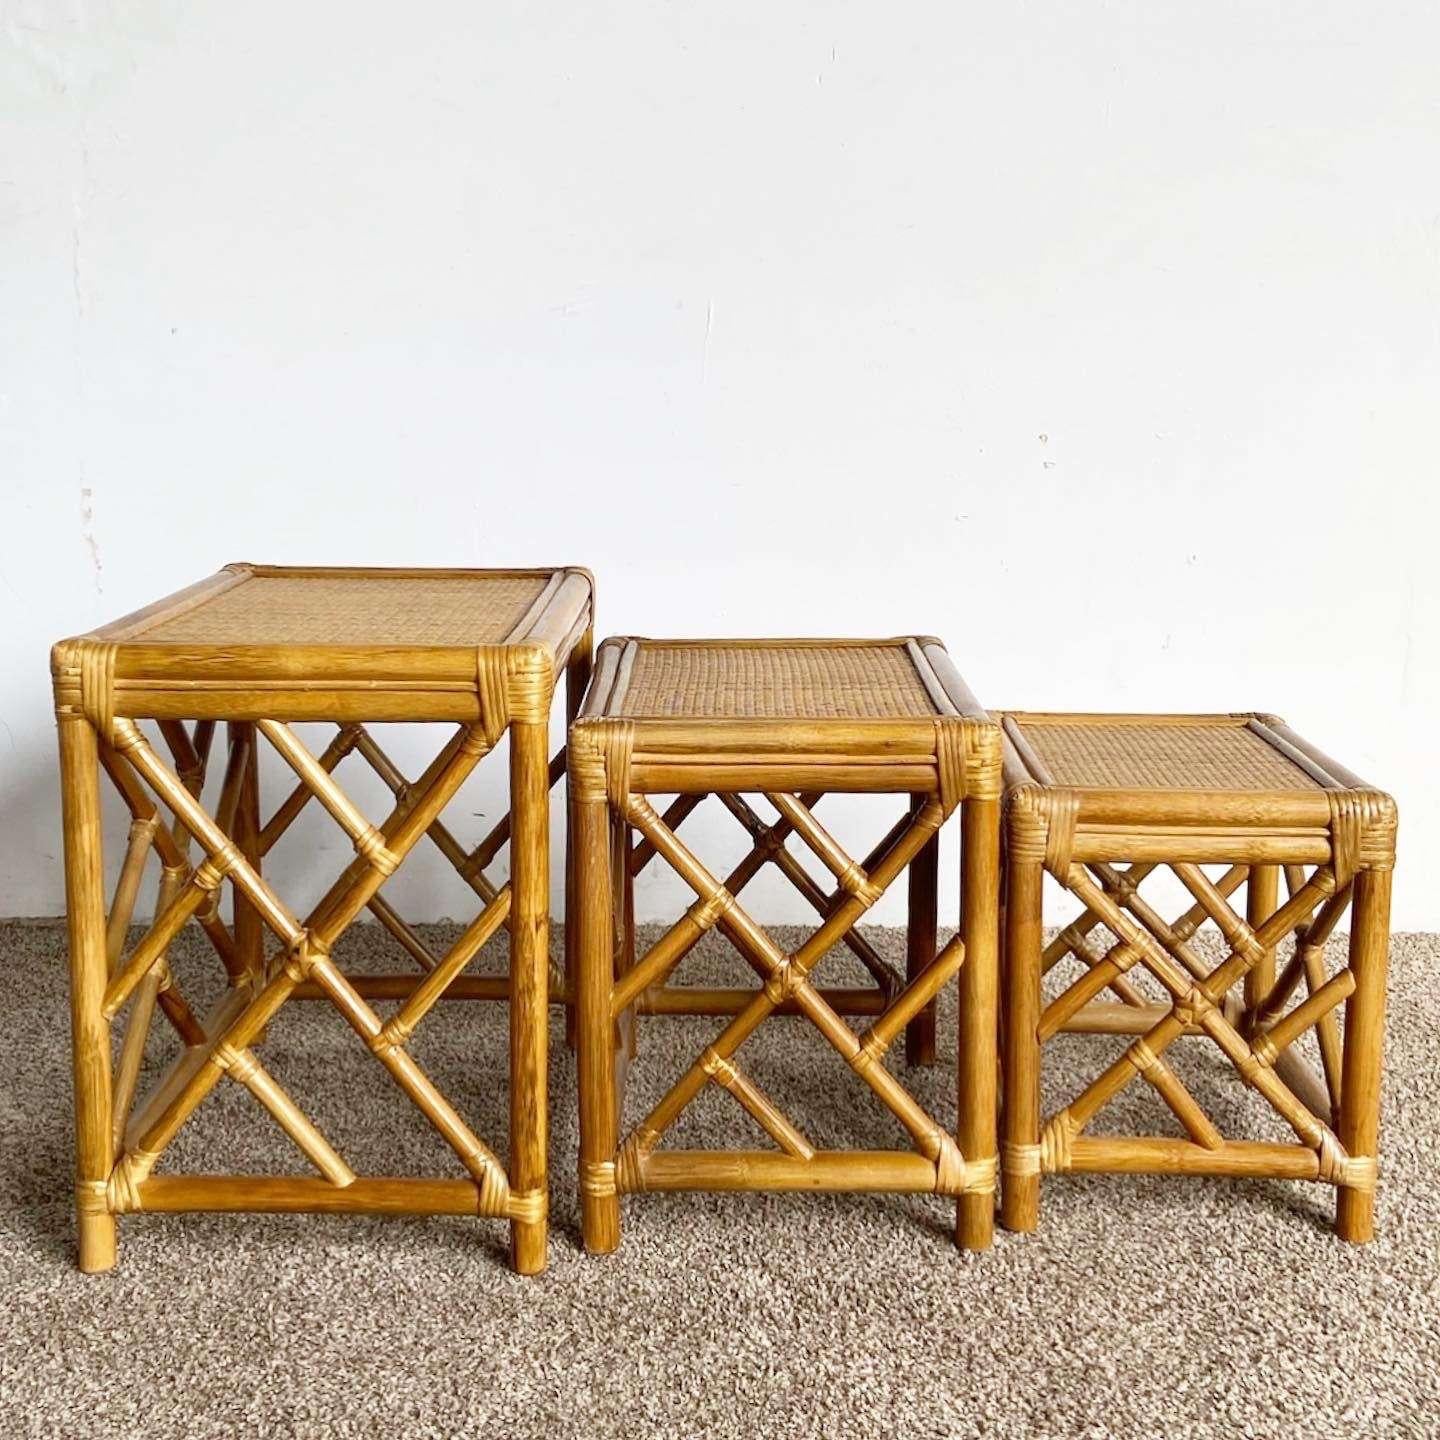 Boho Chic Chippendale Bamboo Rattan and Wicker Nesting Tables - Set of 3 For Sale 1